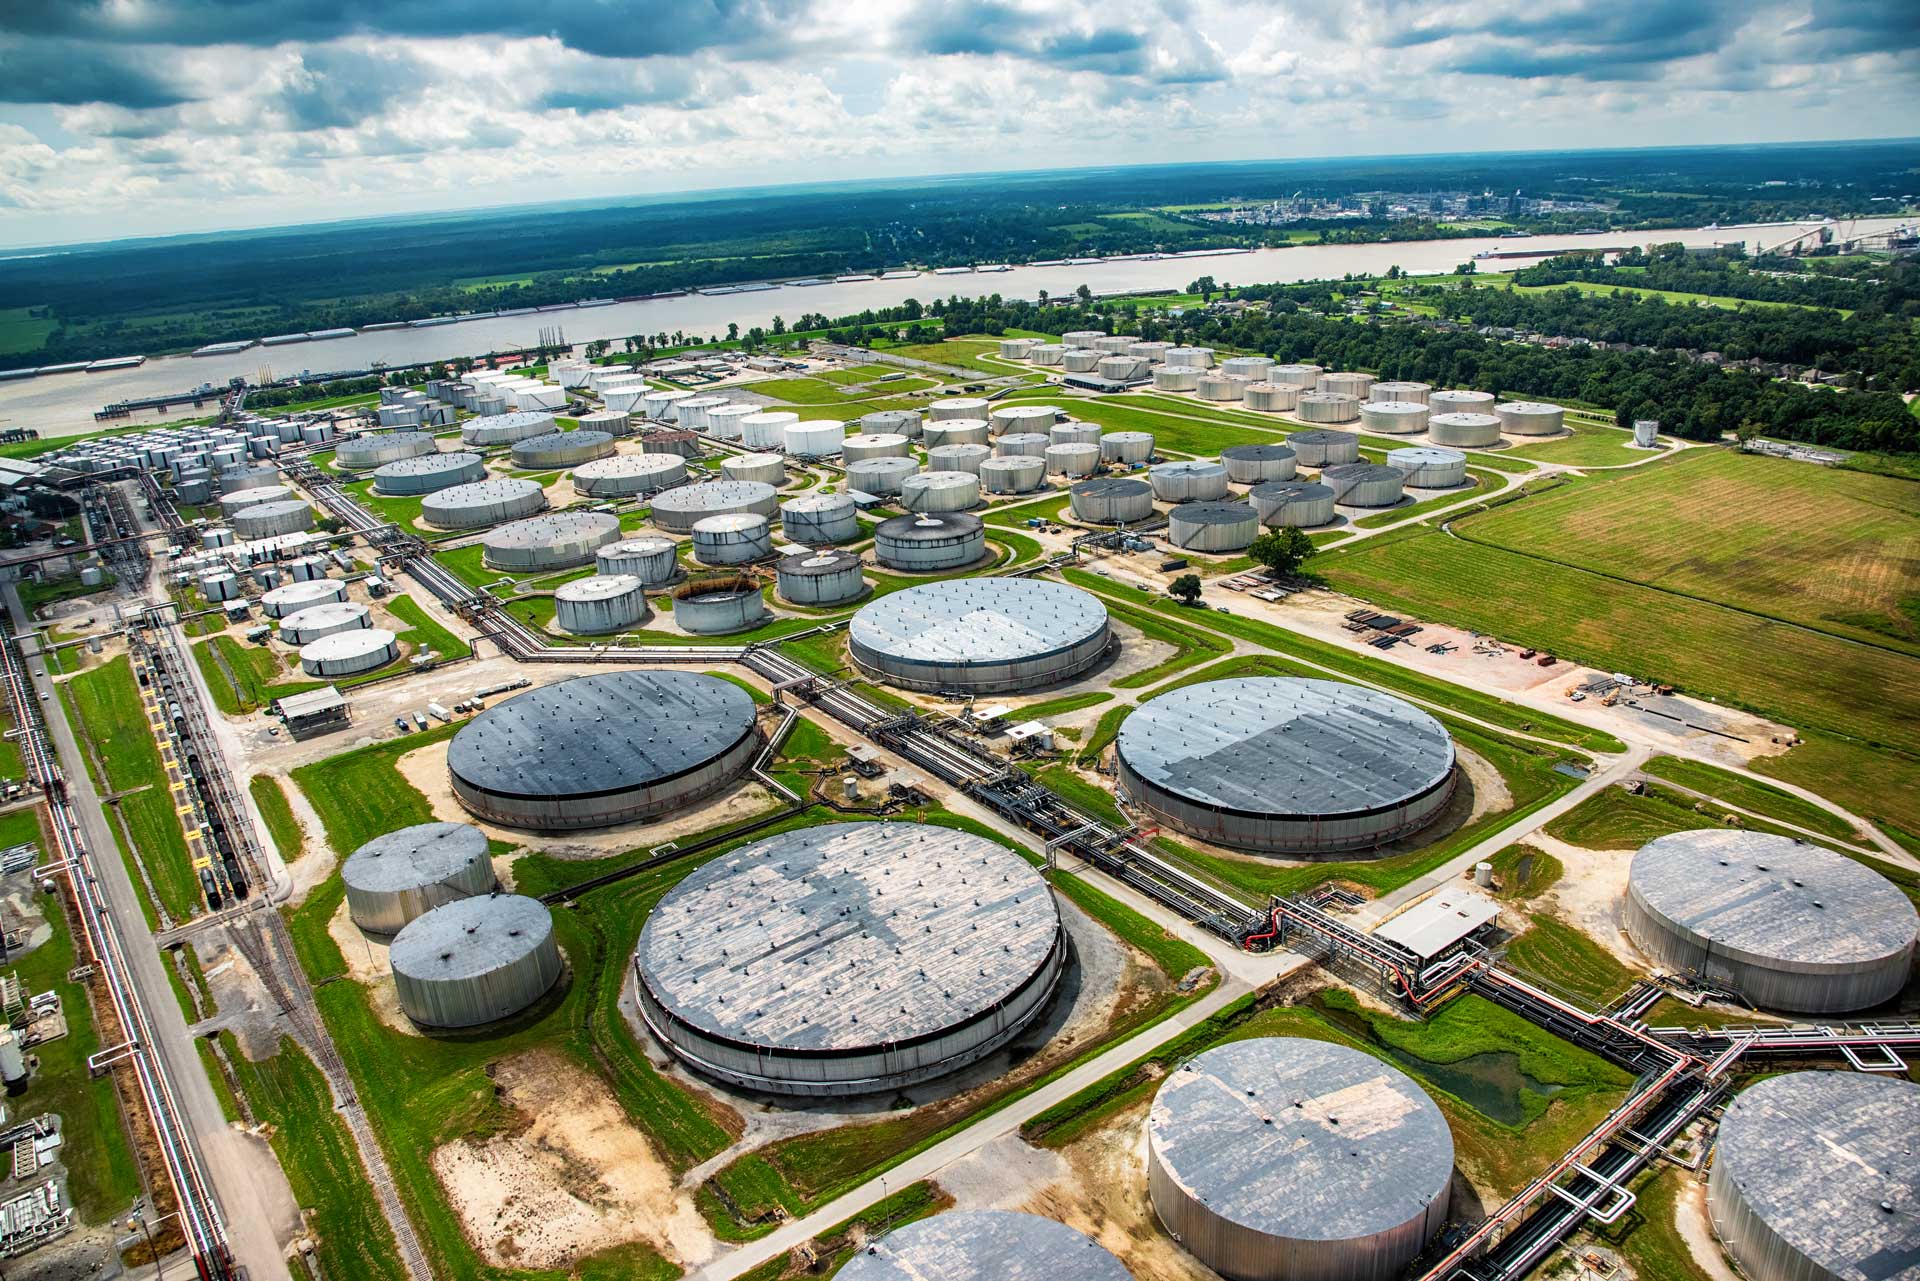 A large oil storage facility located along the Mississippi River just north of New Orleans, Louisiana